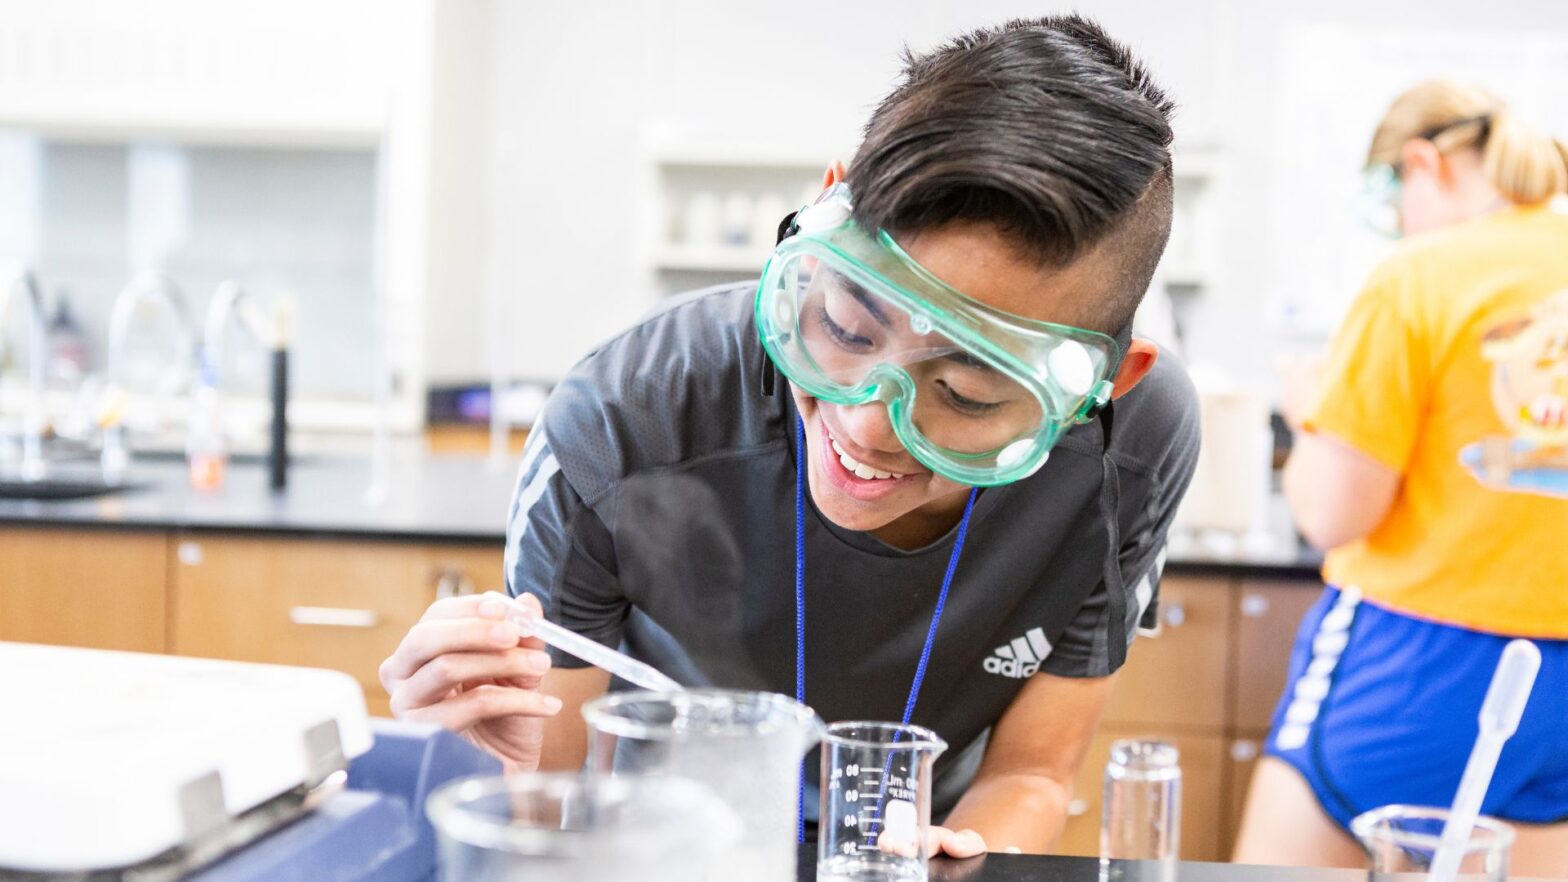 A student wearing goggles at the Investigative Summer STEM Program conducts an experiment.